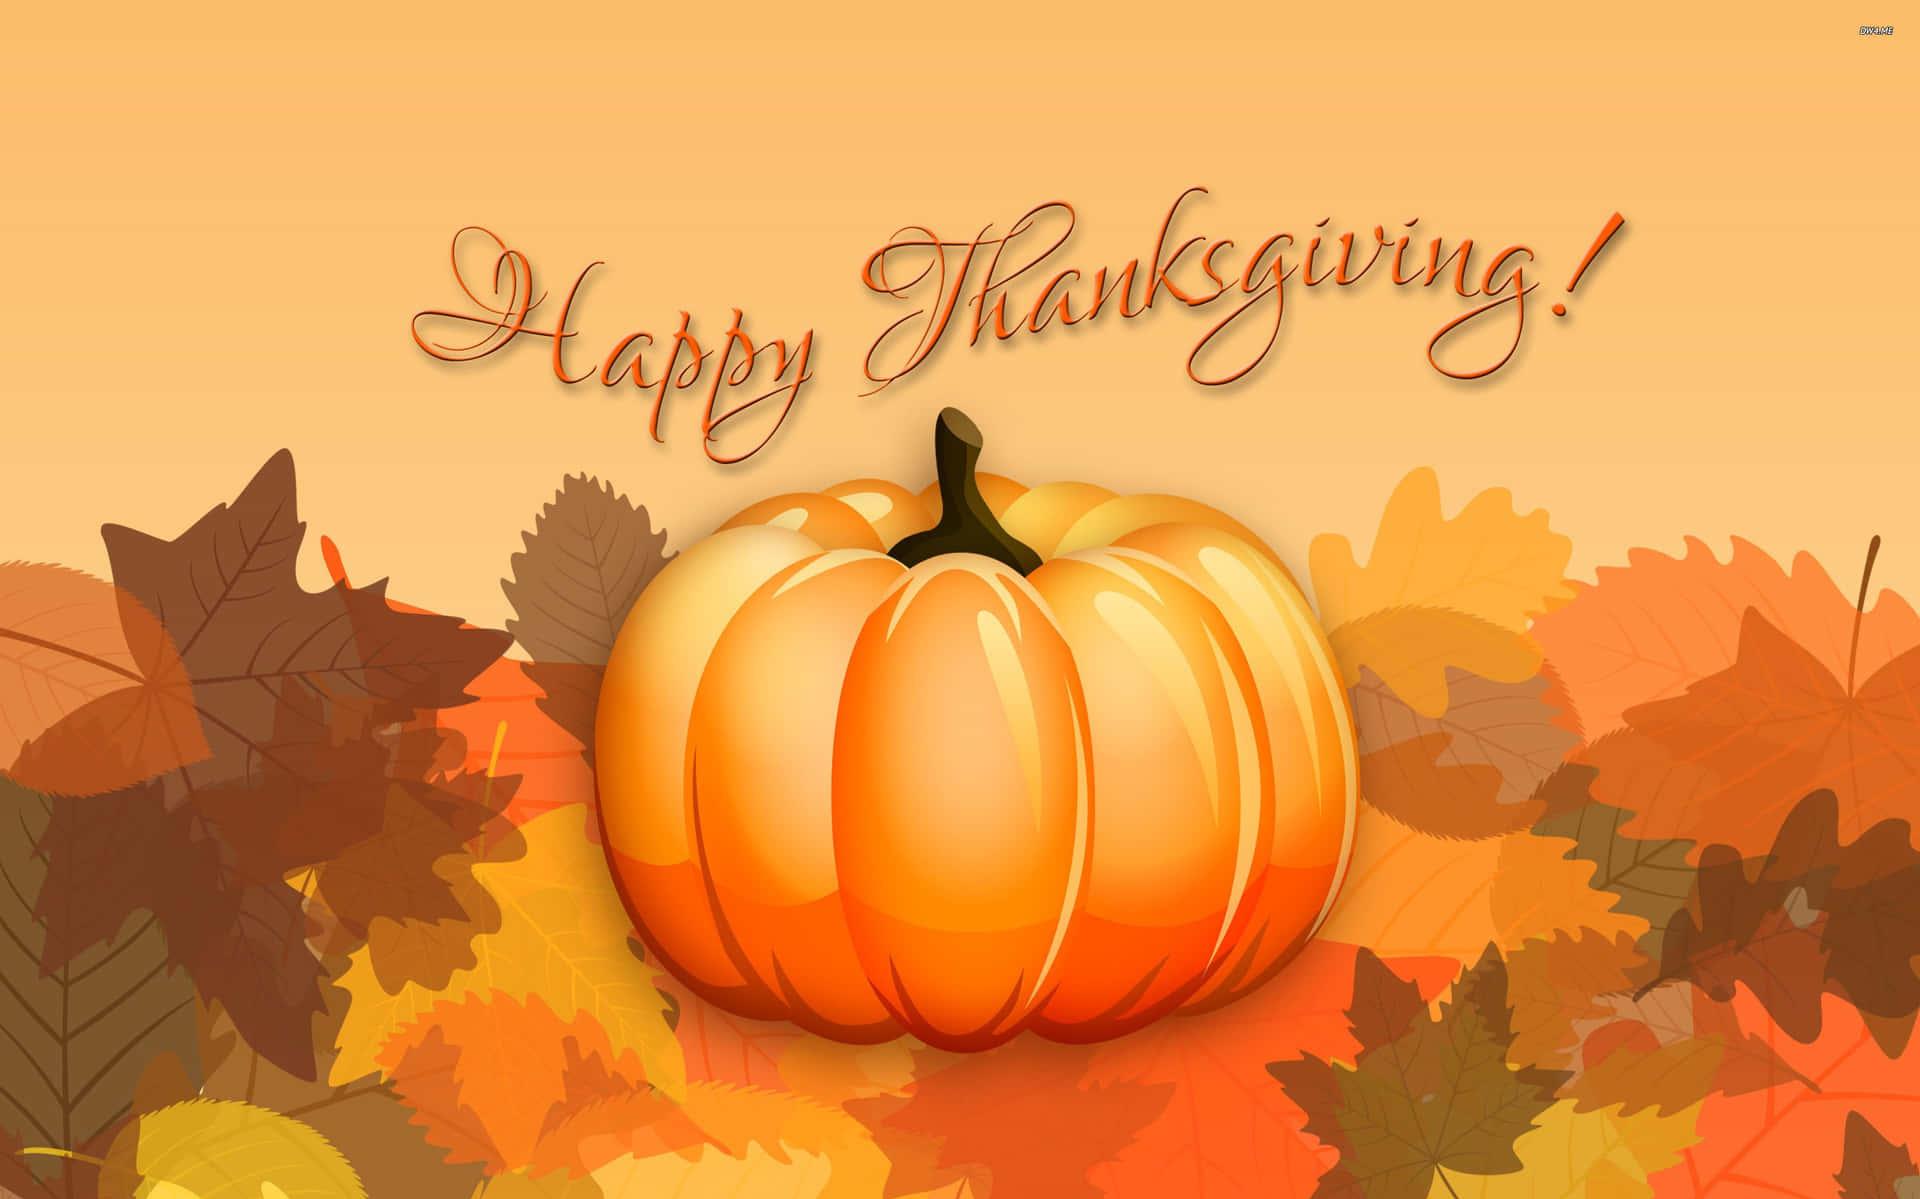 Thanksgiving Day Pictures Wallpaper